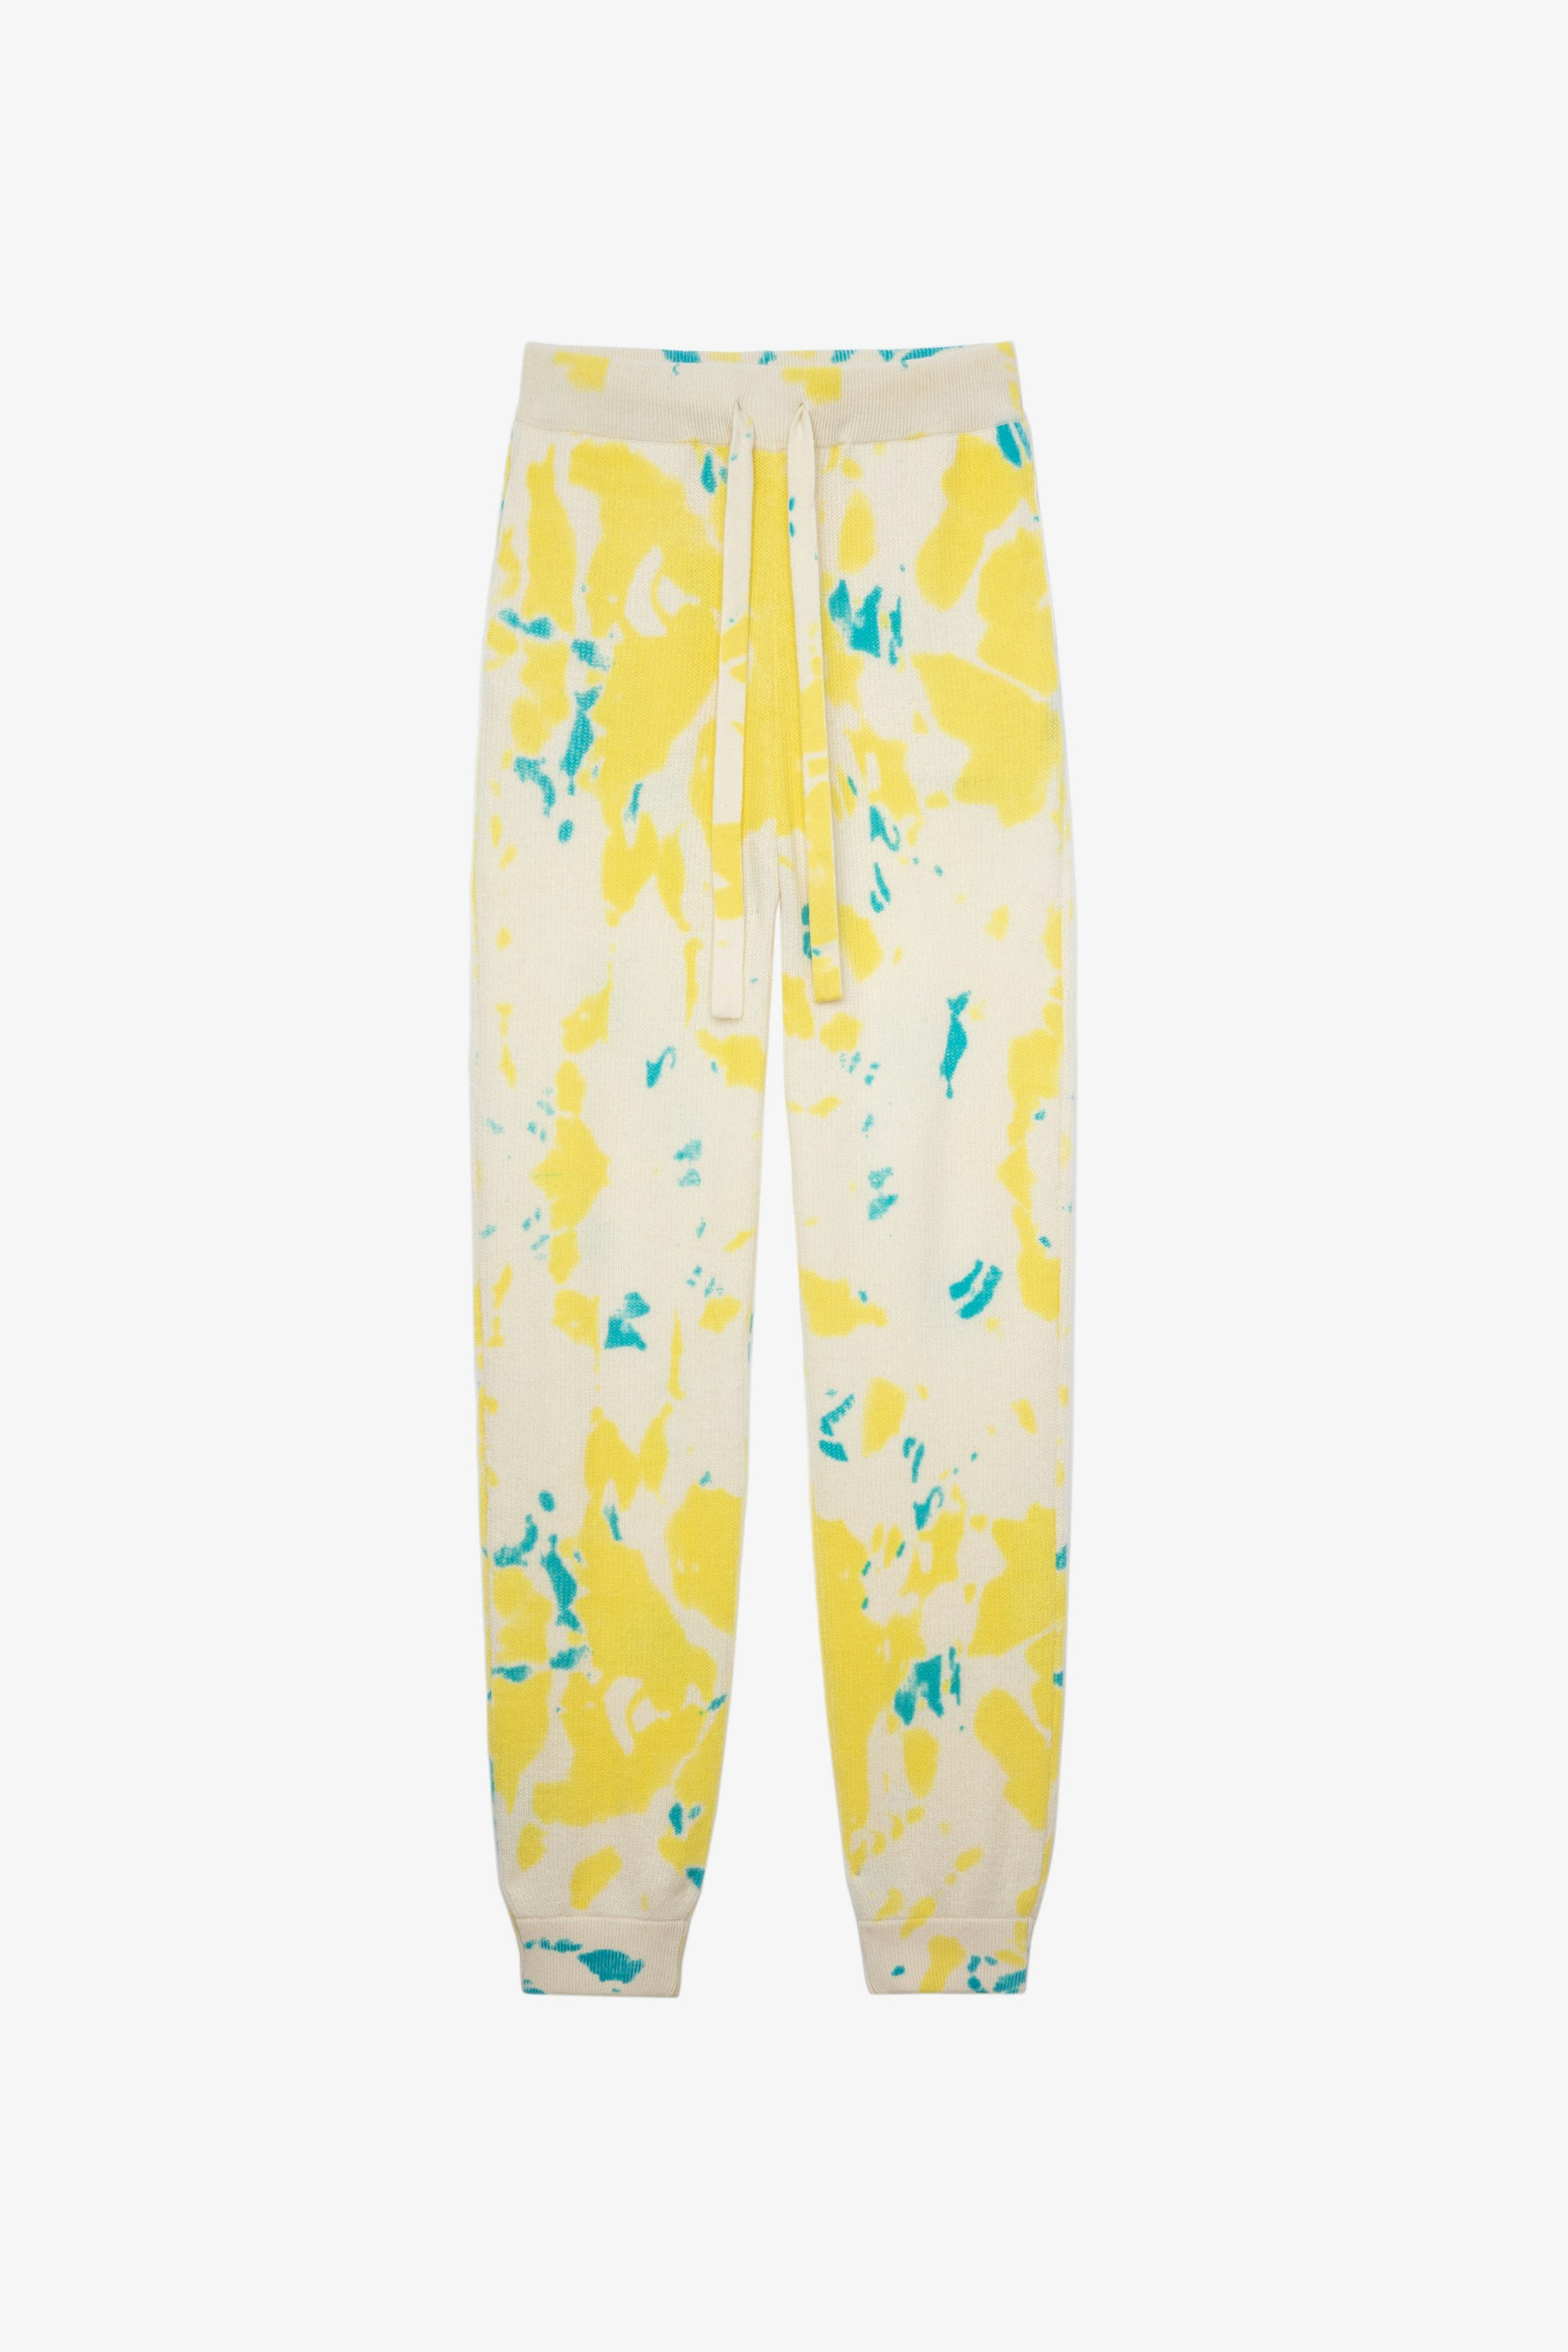 Steevy Cashmere Trousers Women's blue and yellow tie-dye cashmere bottoms